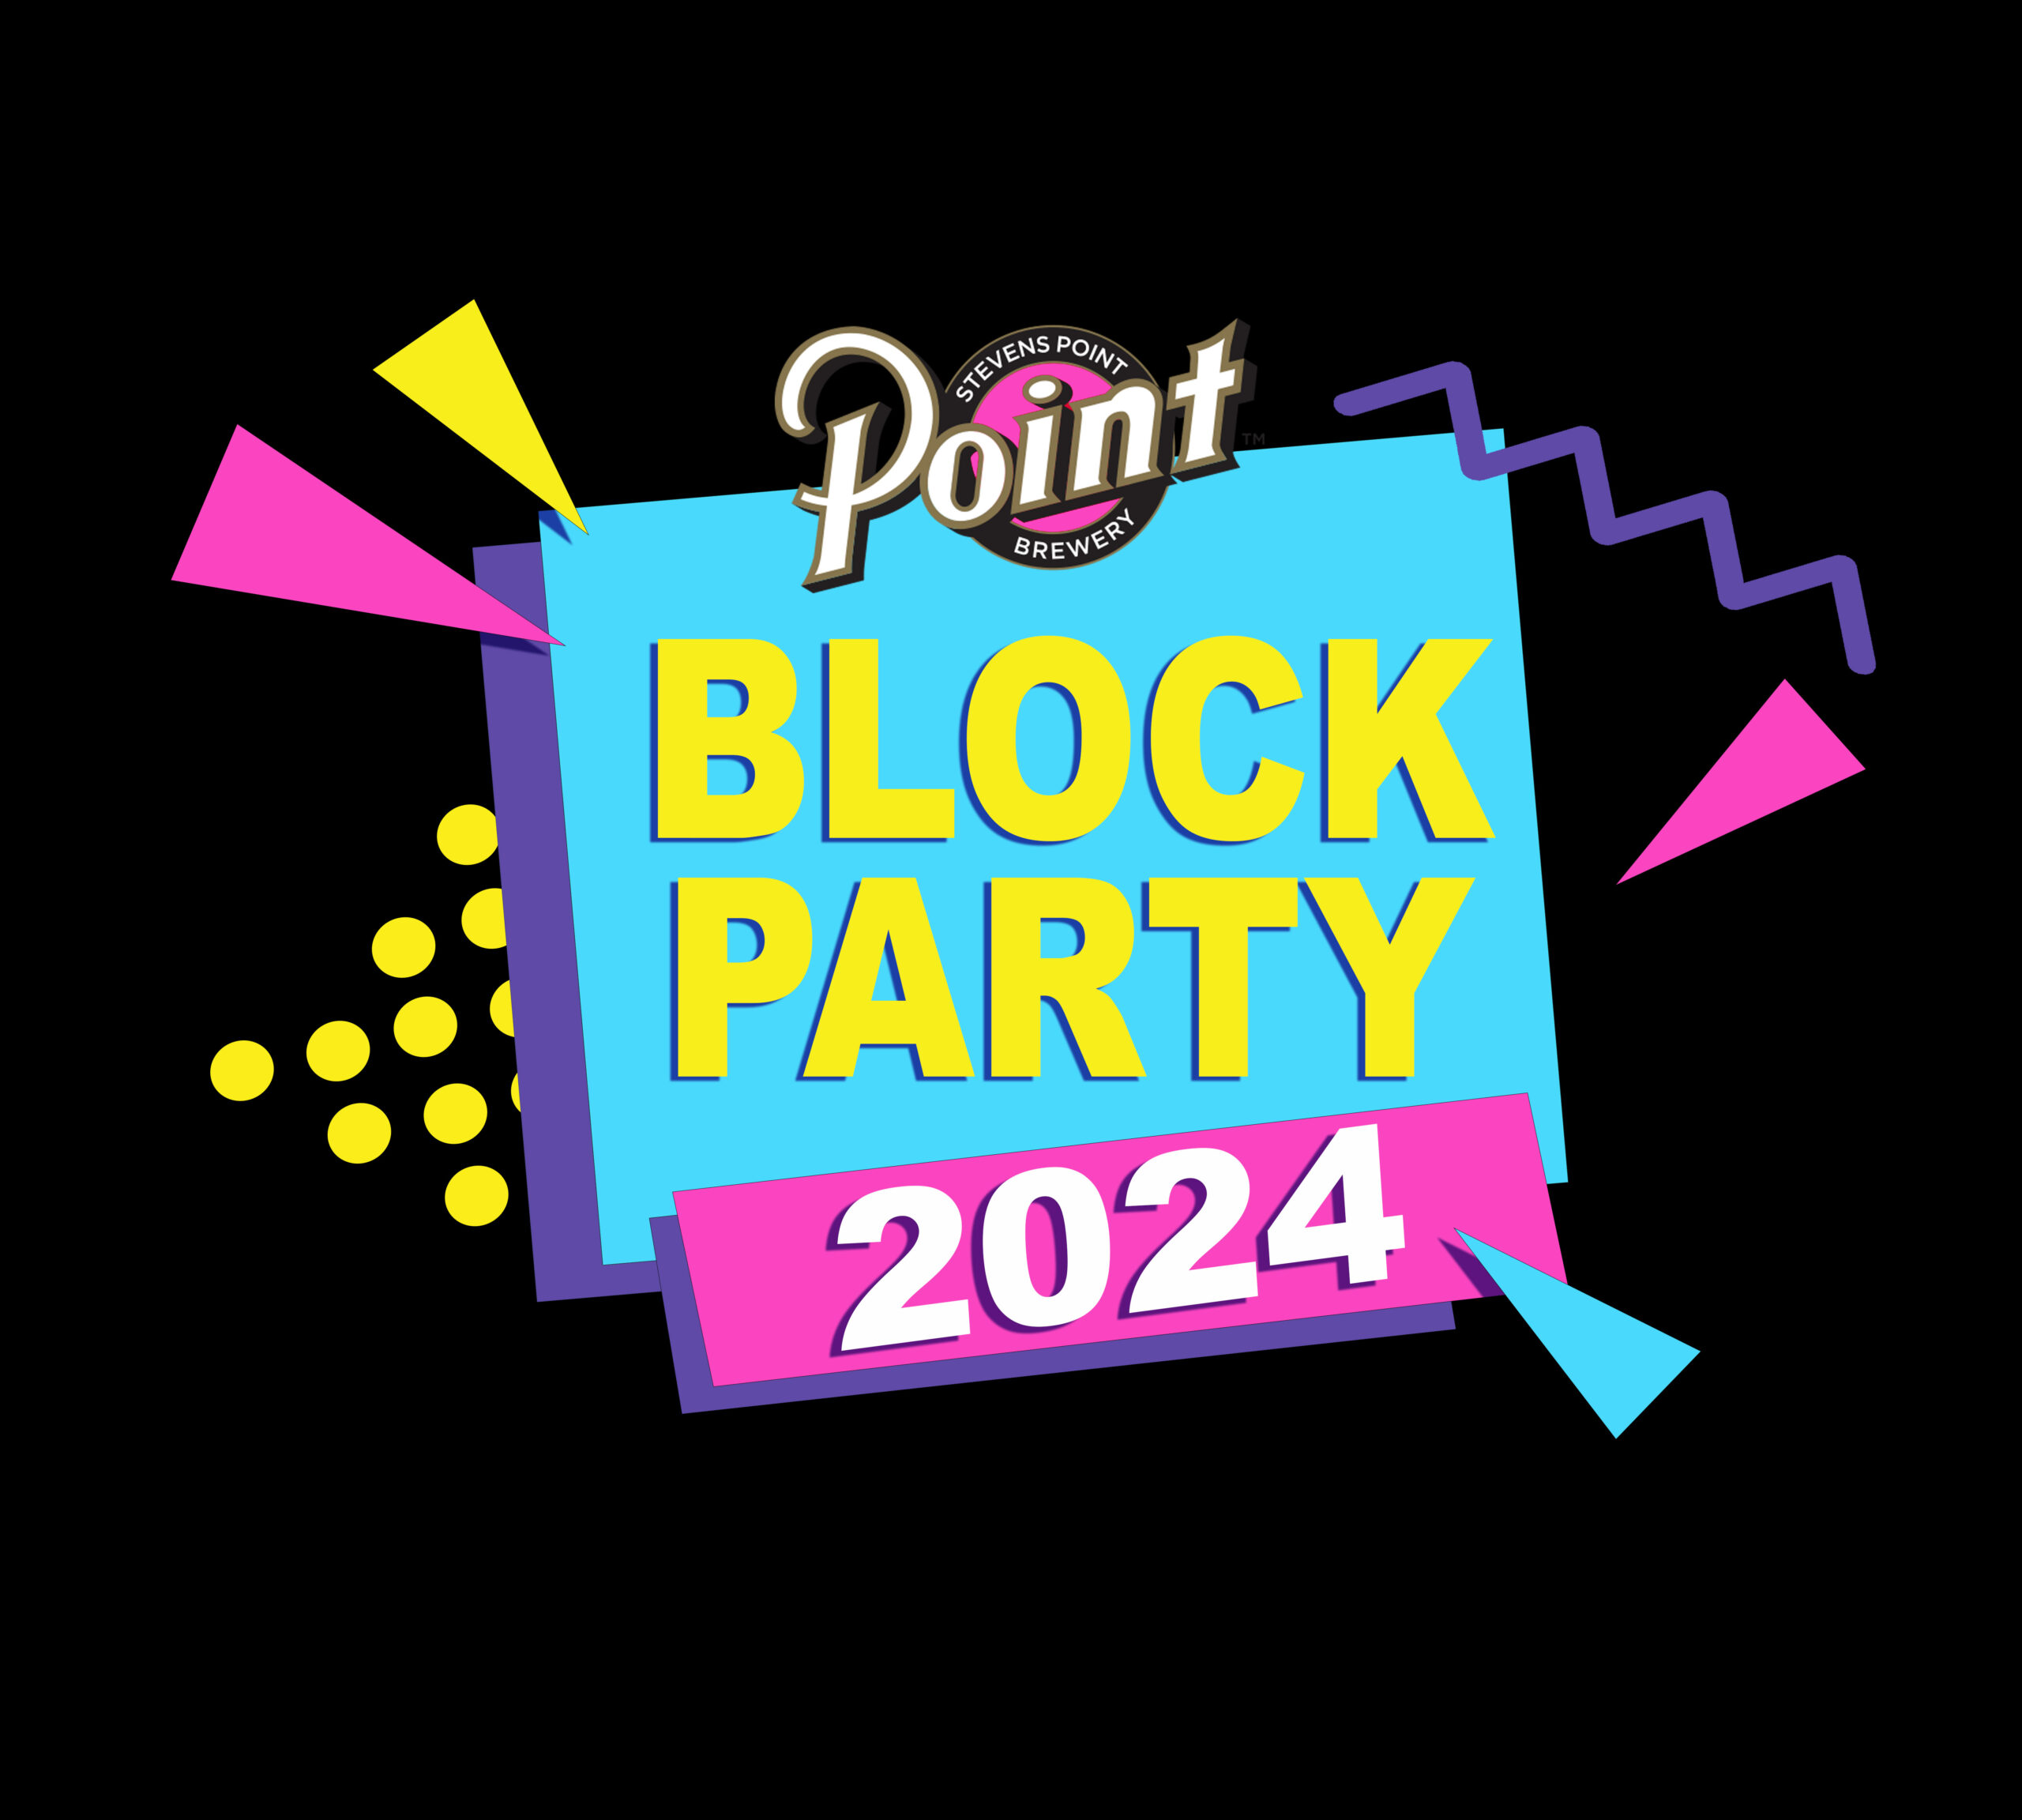 Event - Point Brewery Block Party!